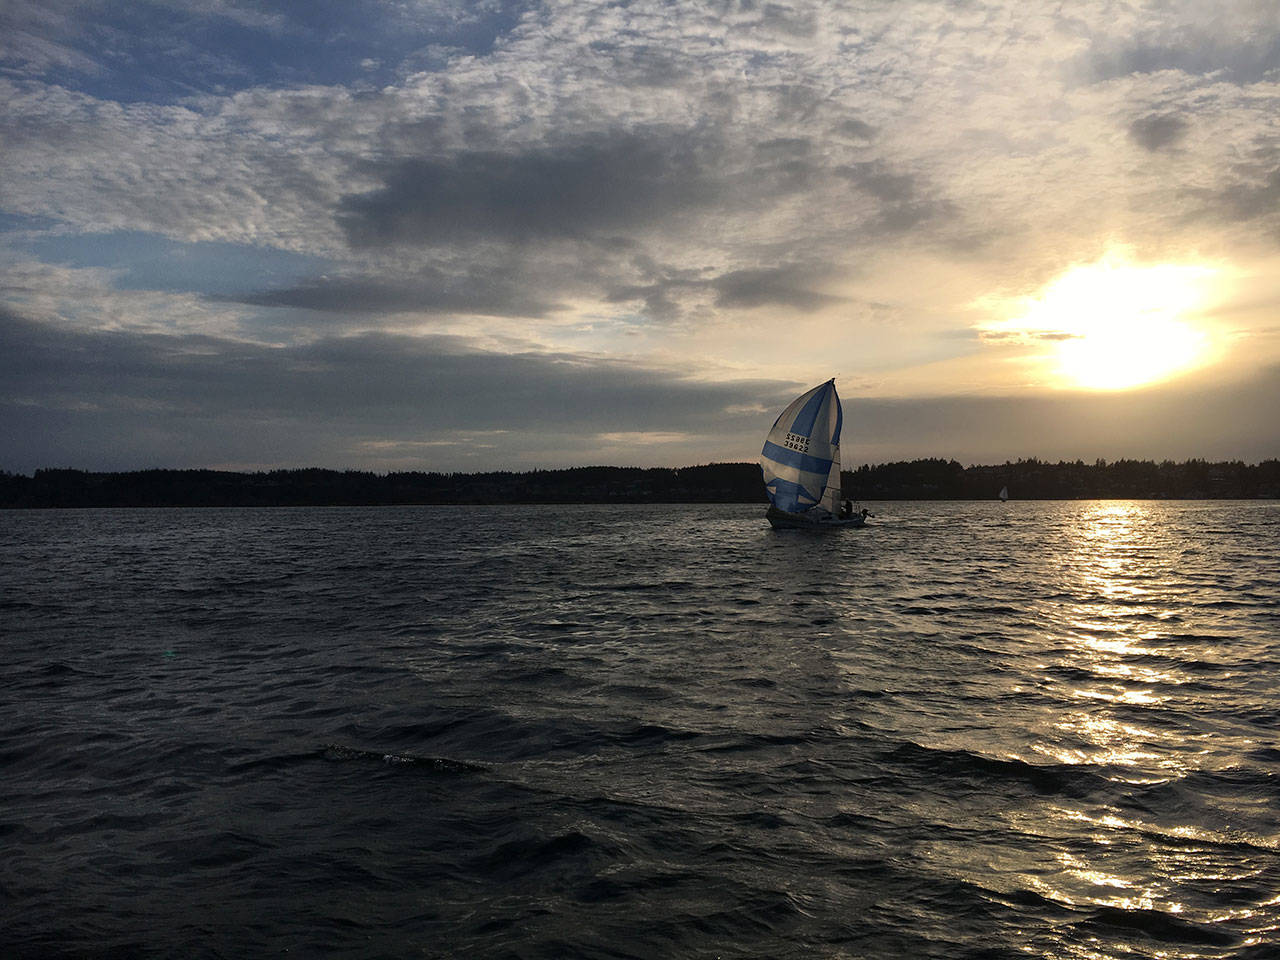 Separator competes in the Oak Harbor Yacht Club’s Frostbite Series last Thursday. (Photo by Dave Steckman)